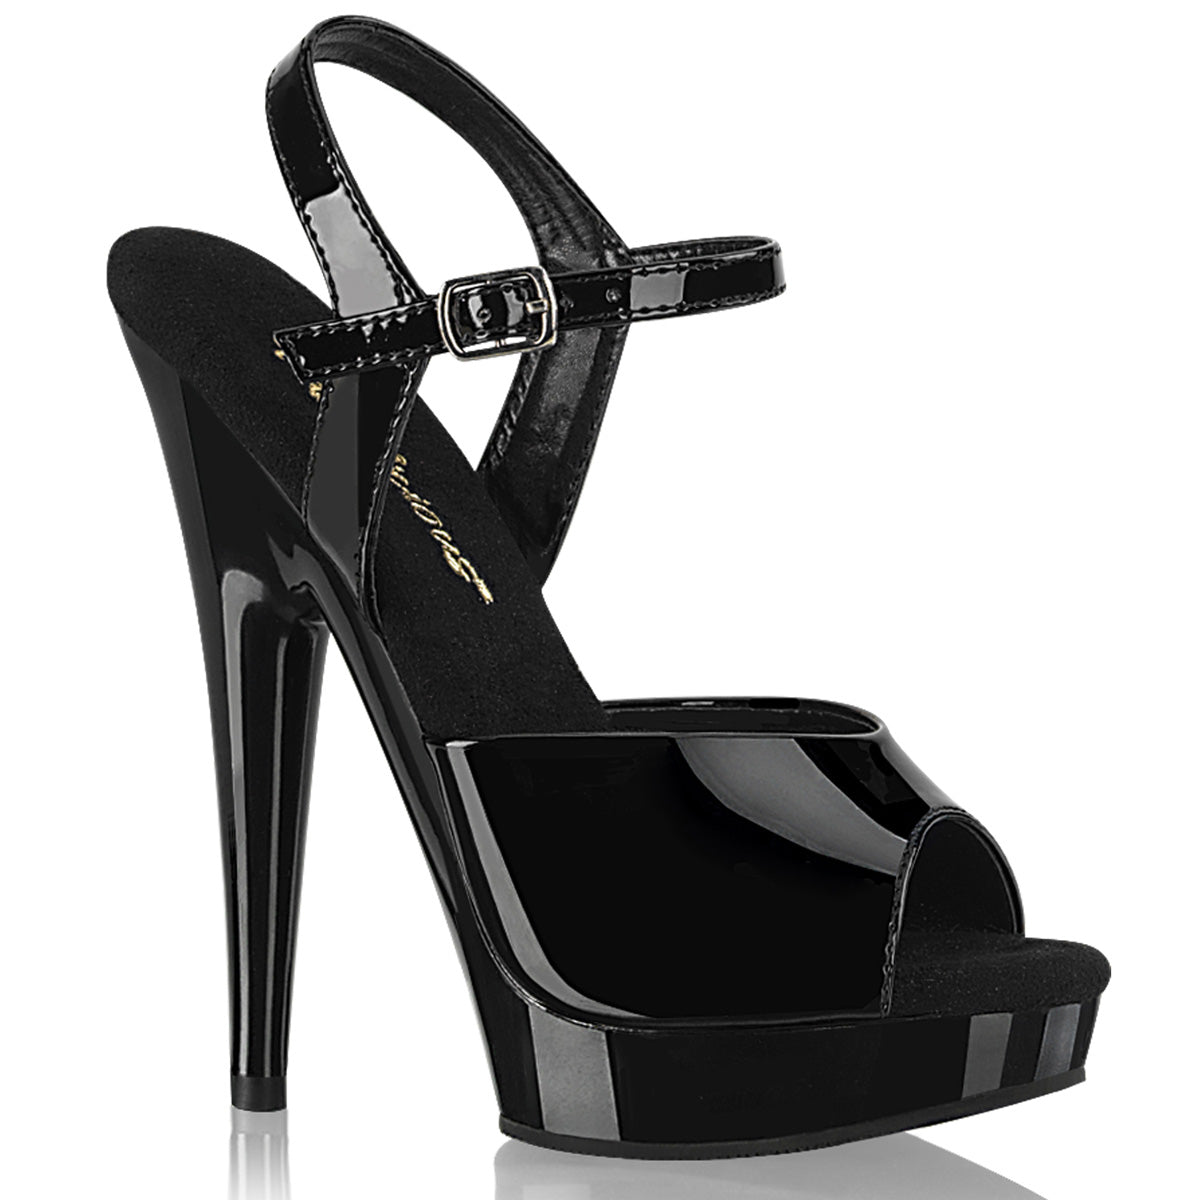 SULTRY-609 Black Patent/Black Fabulicious